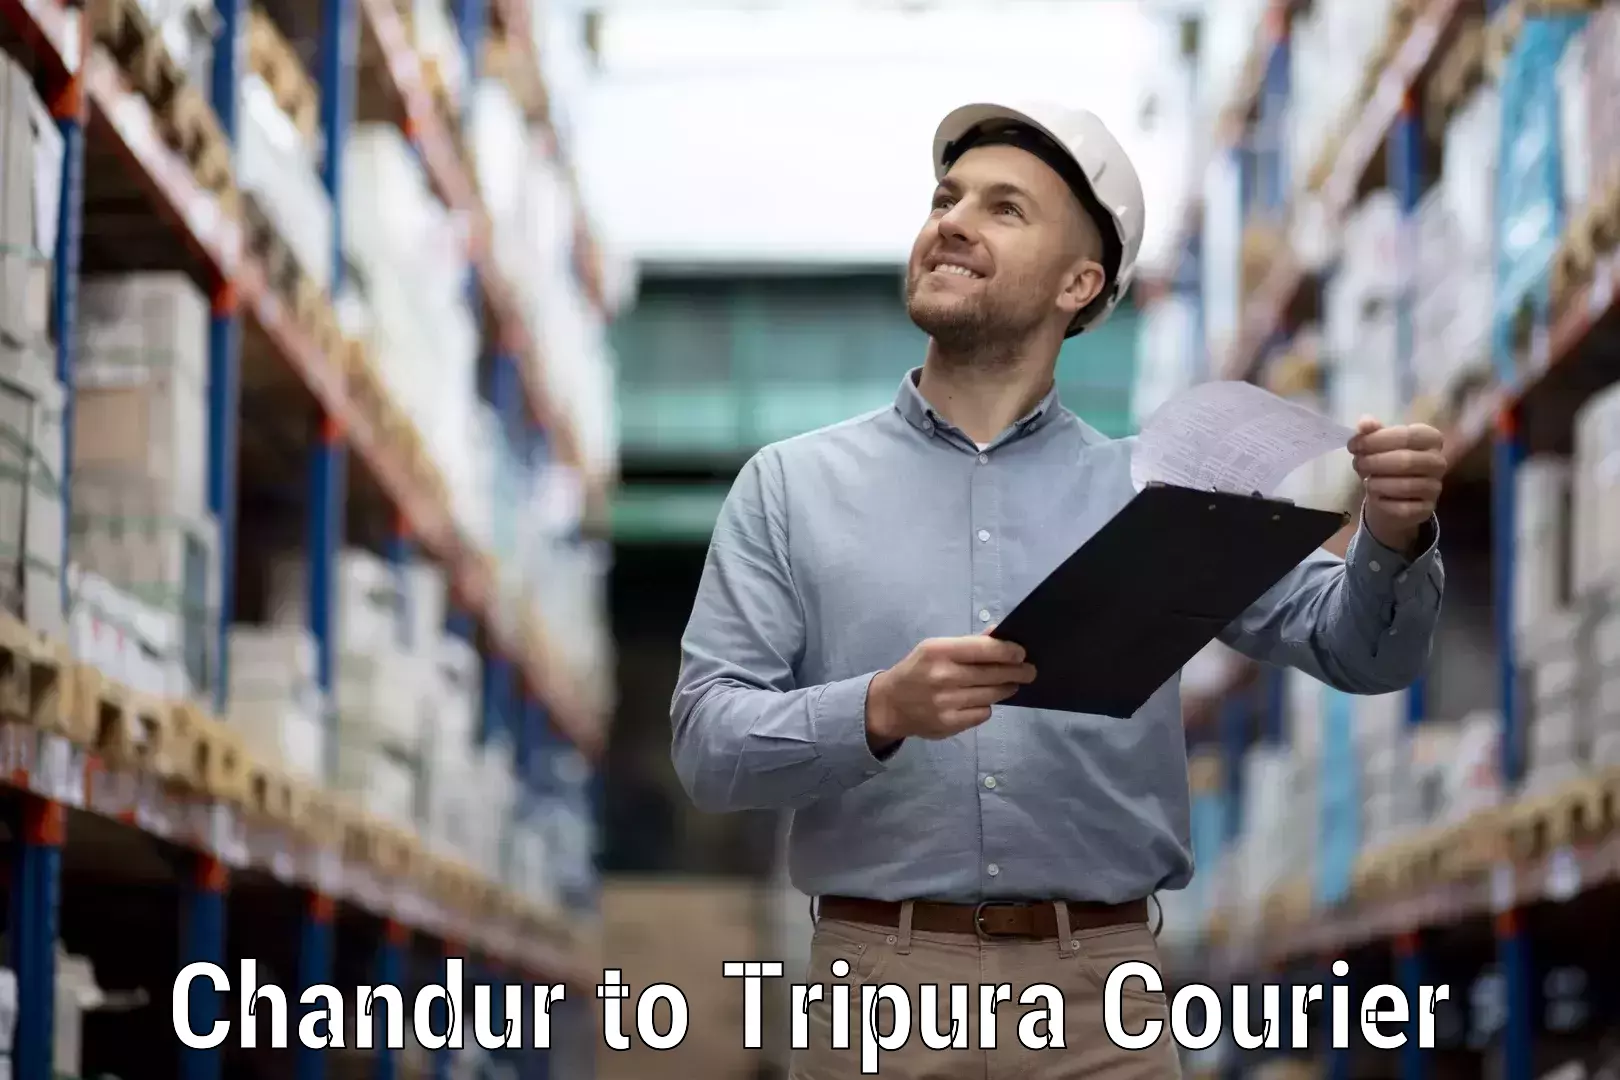 Reliable courier service Chandur to Udaipur Tripura